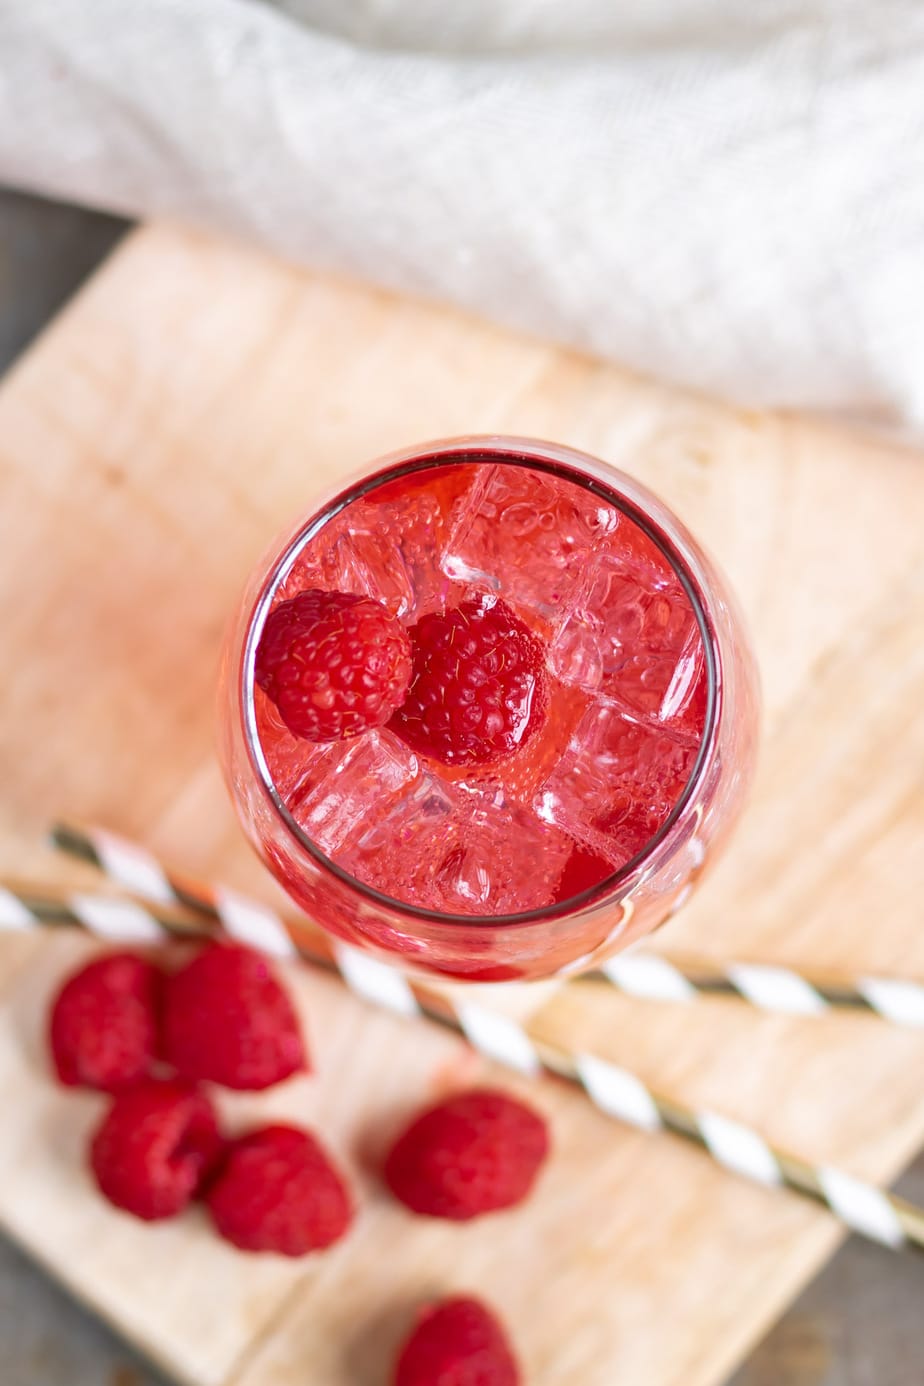 Looking down into a glass of drink with ice and fresh raspberries.